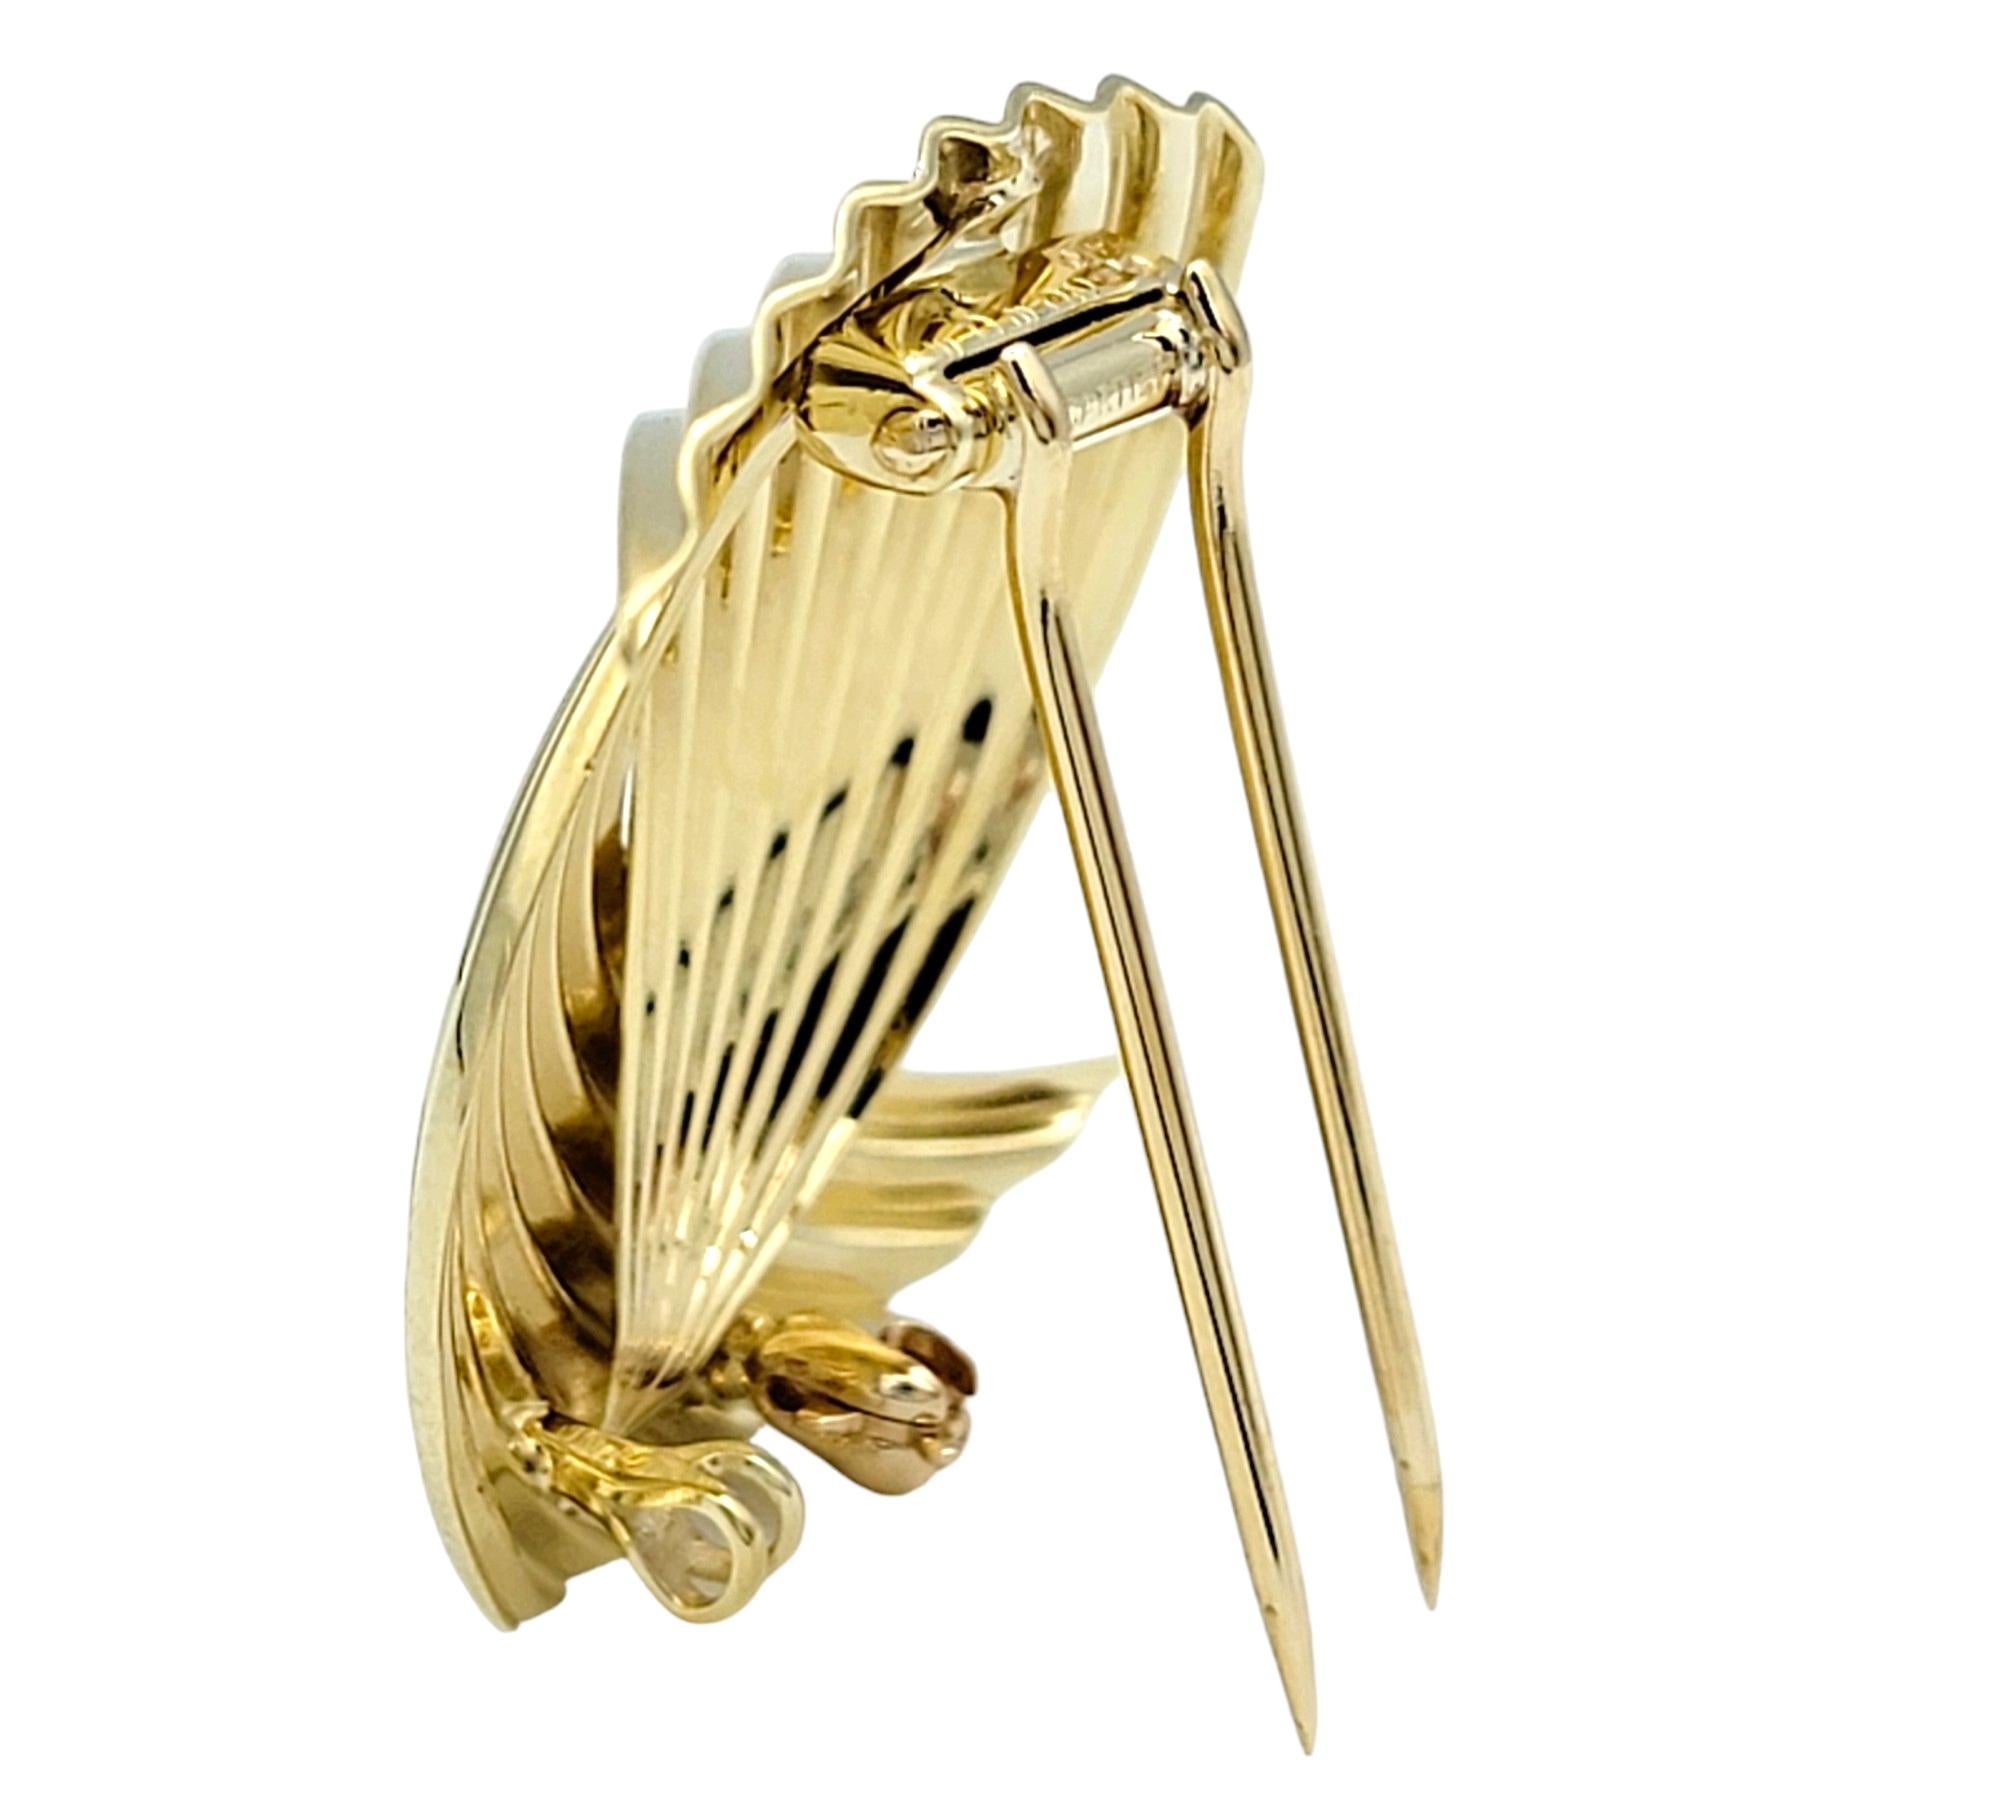 Vintage Cartier Bypass Design Ridged Brooch Set in Polished 14 Karat Yellow Gold In Good Condition For Sale In Scottsdale, AZ